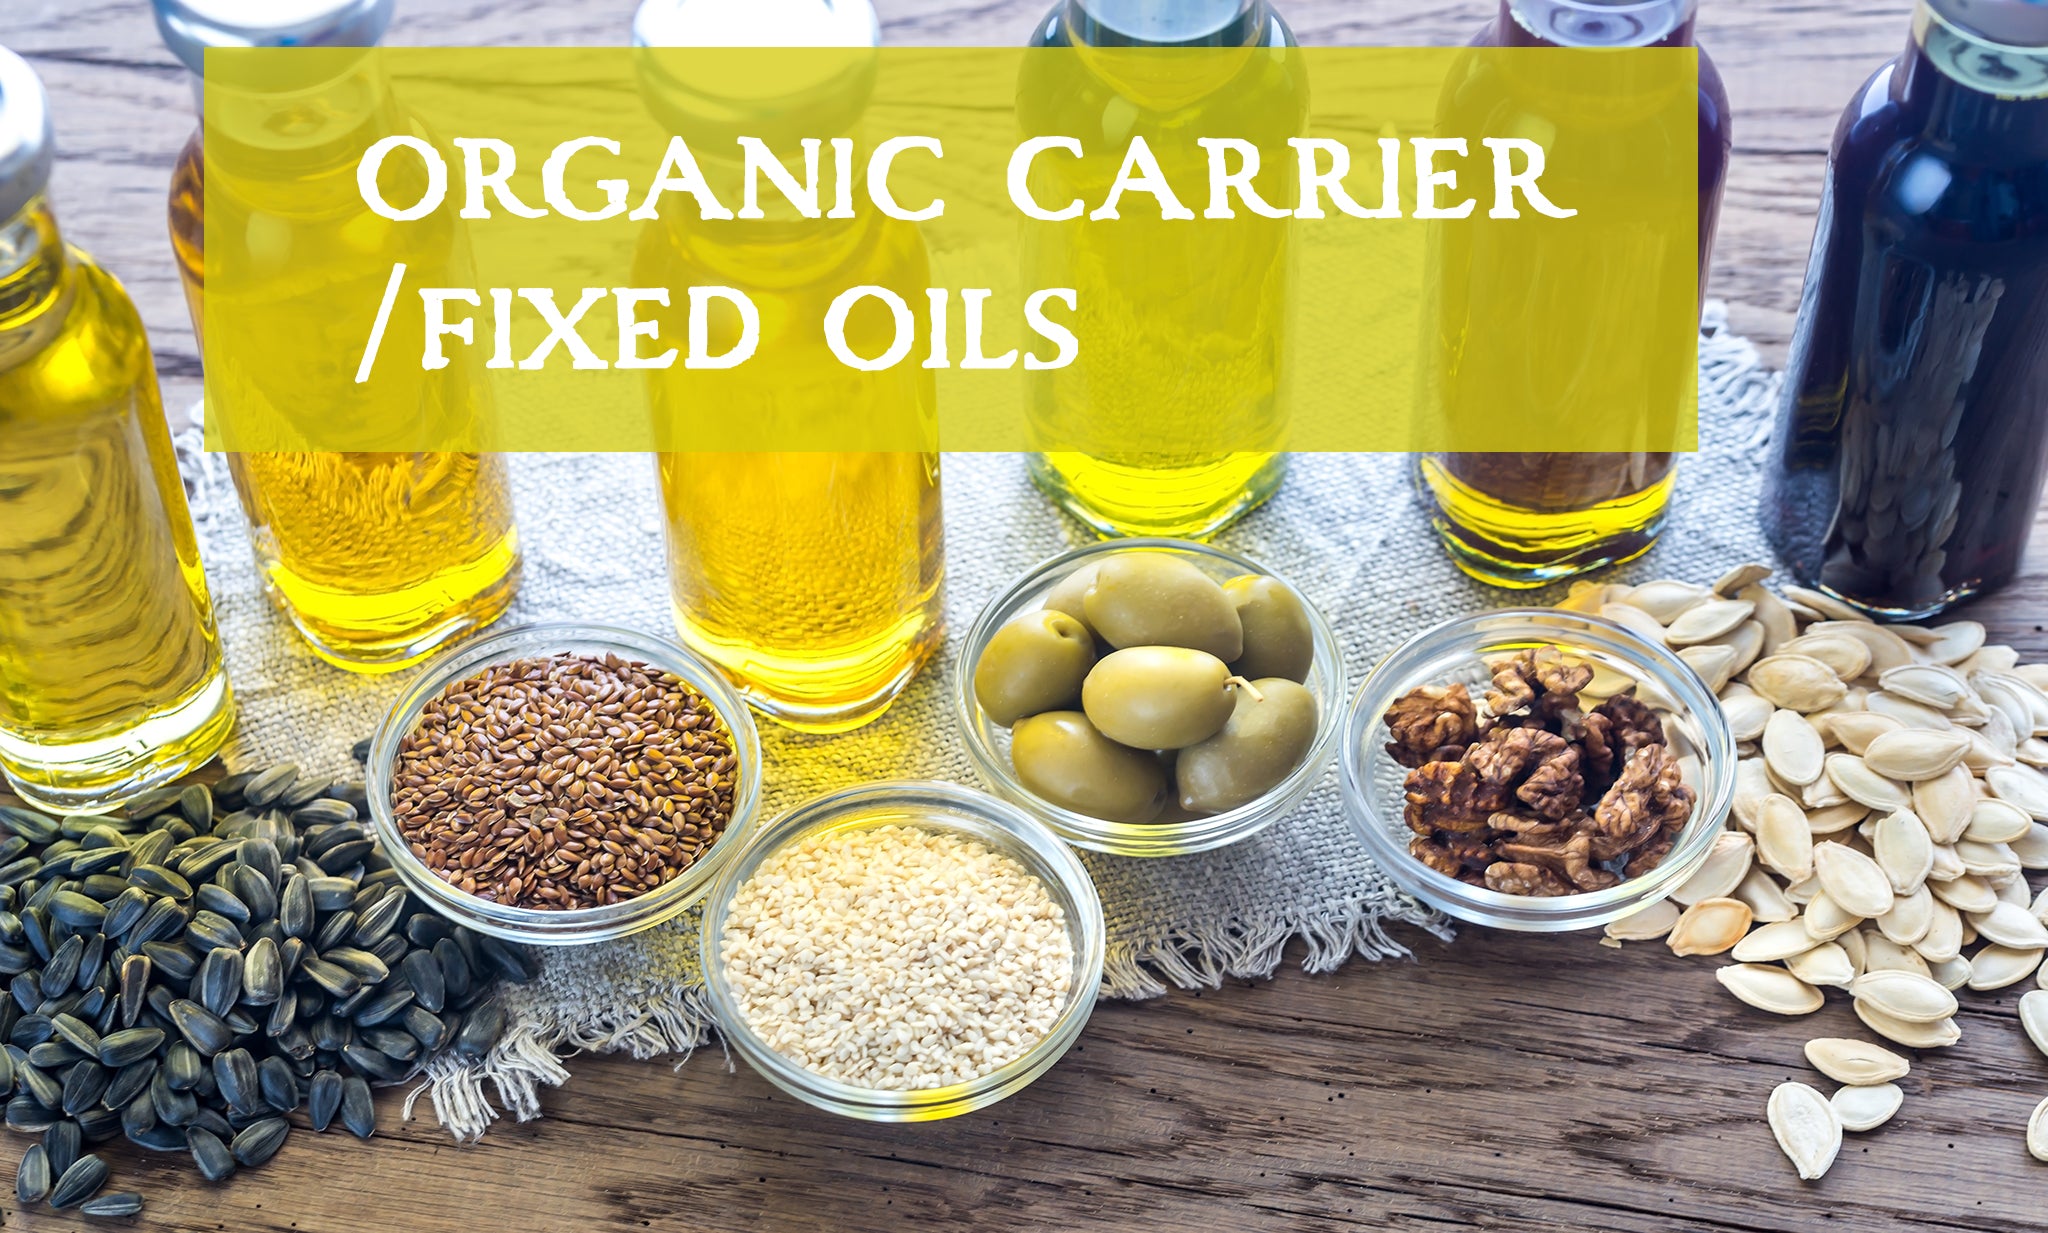 certified organic plant based carrier fixed oils for aromatherapy and skin care